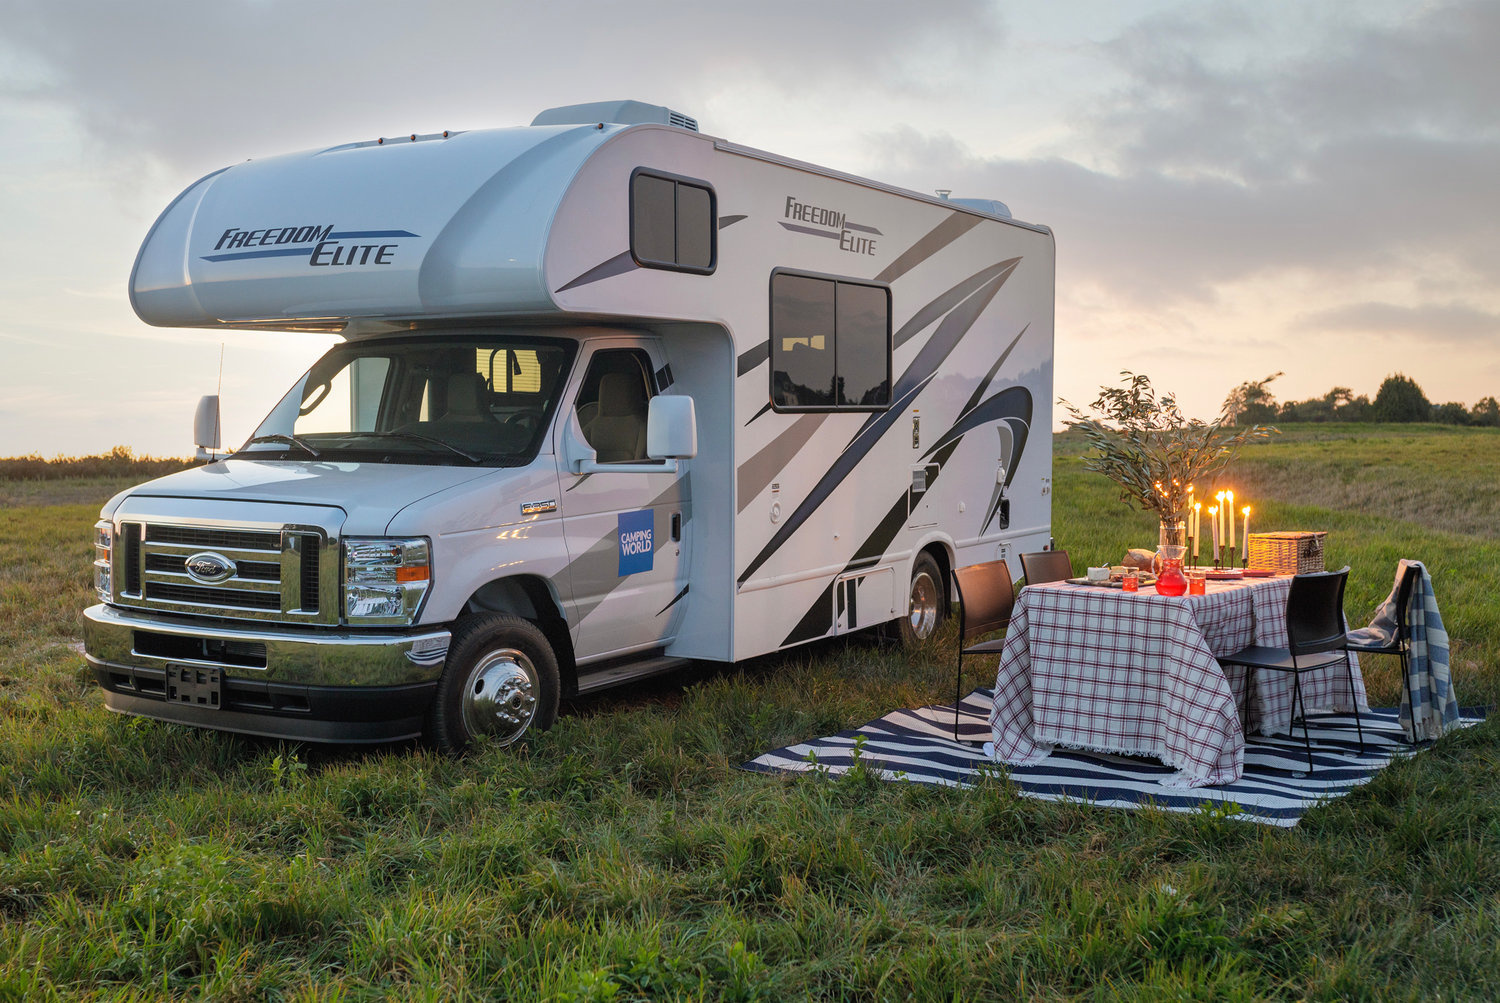 The 24-foot motorhome is a Dream Home first and includes sleeping space for five, a high-end kitchen, and outdoor lounge set